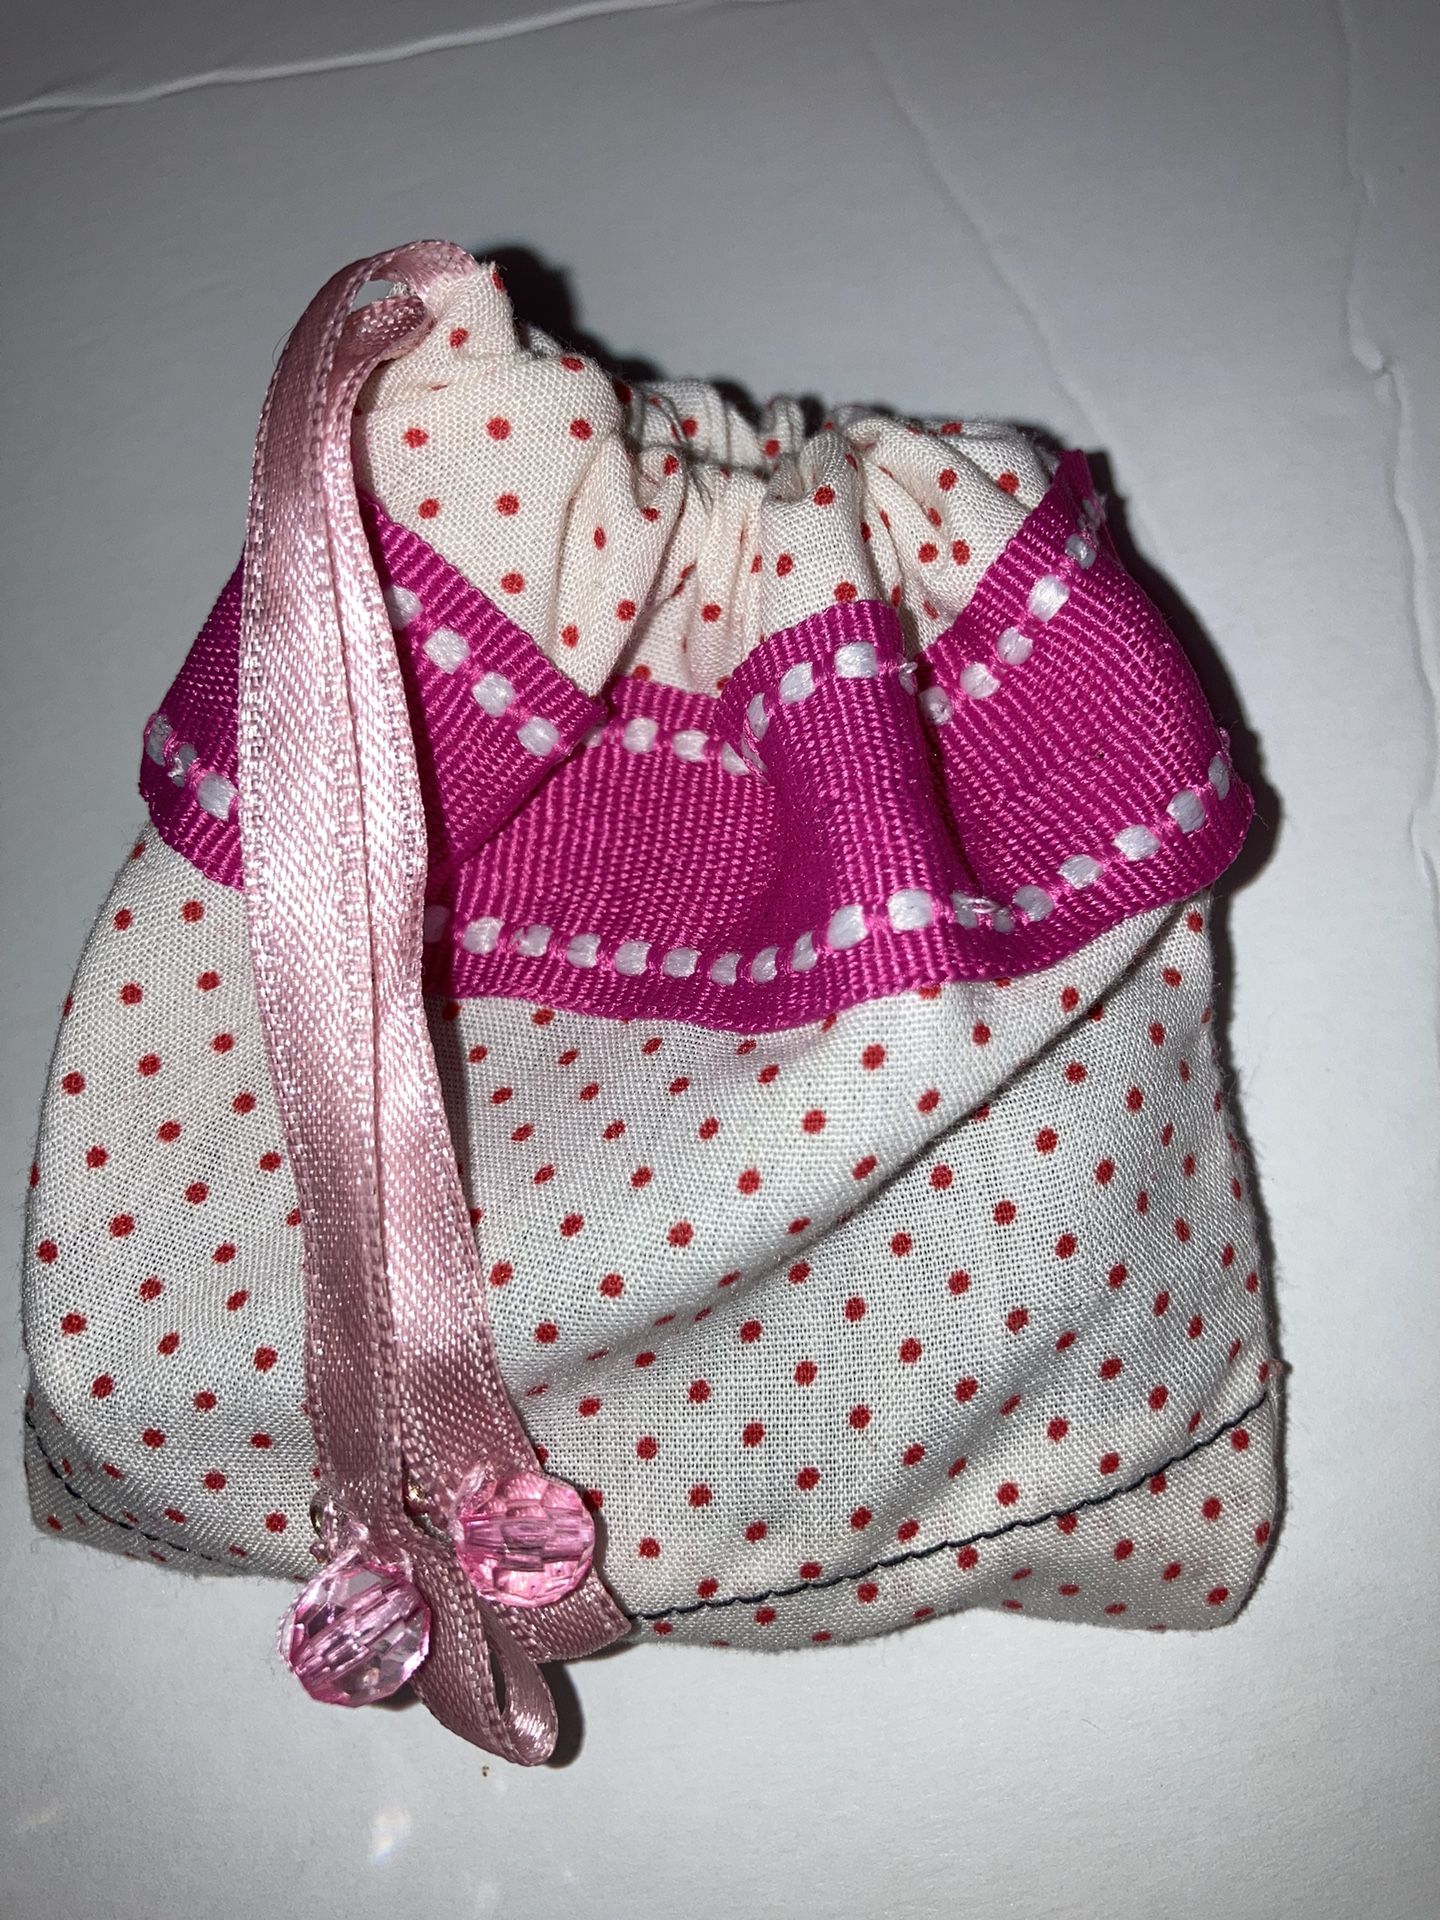 Small Gift Bag For Crystals Or Jewelry 